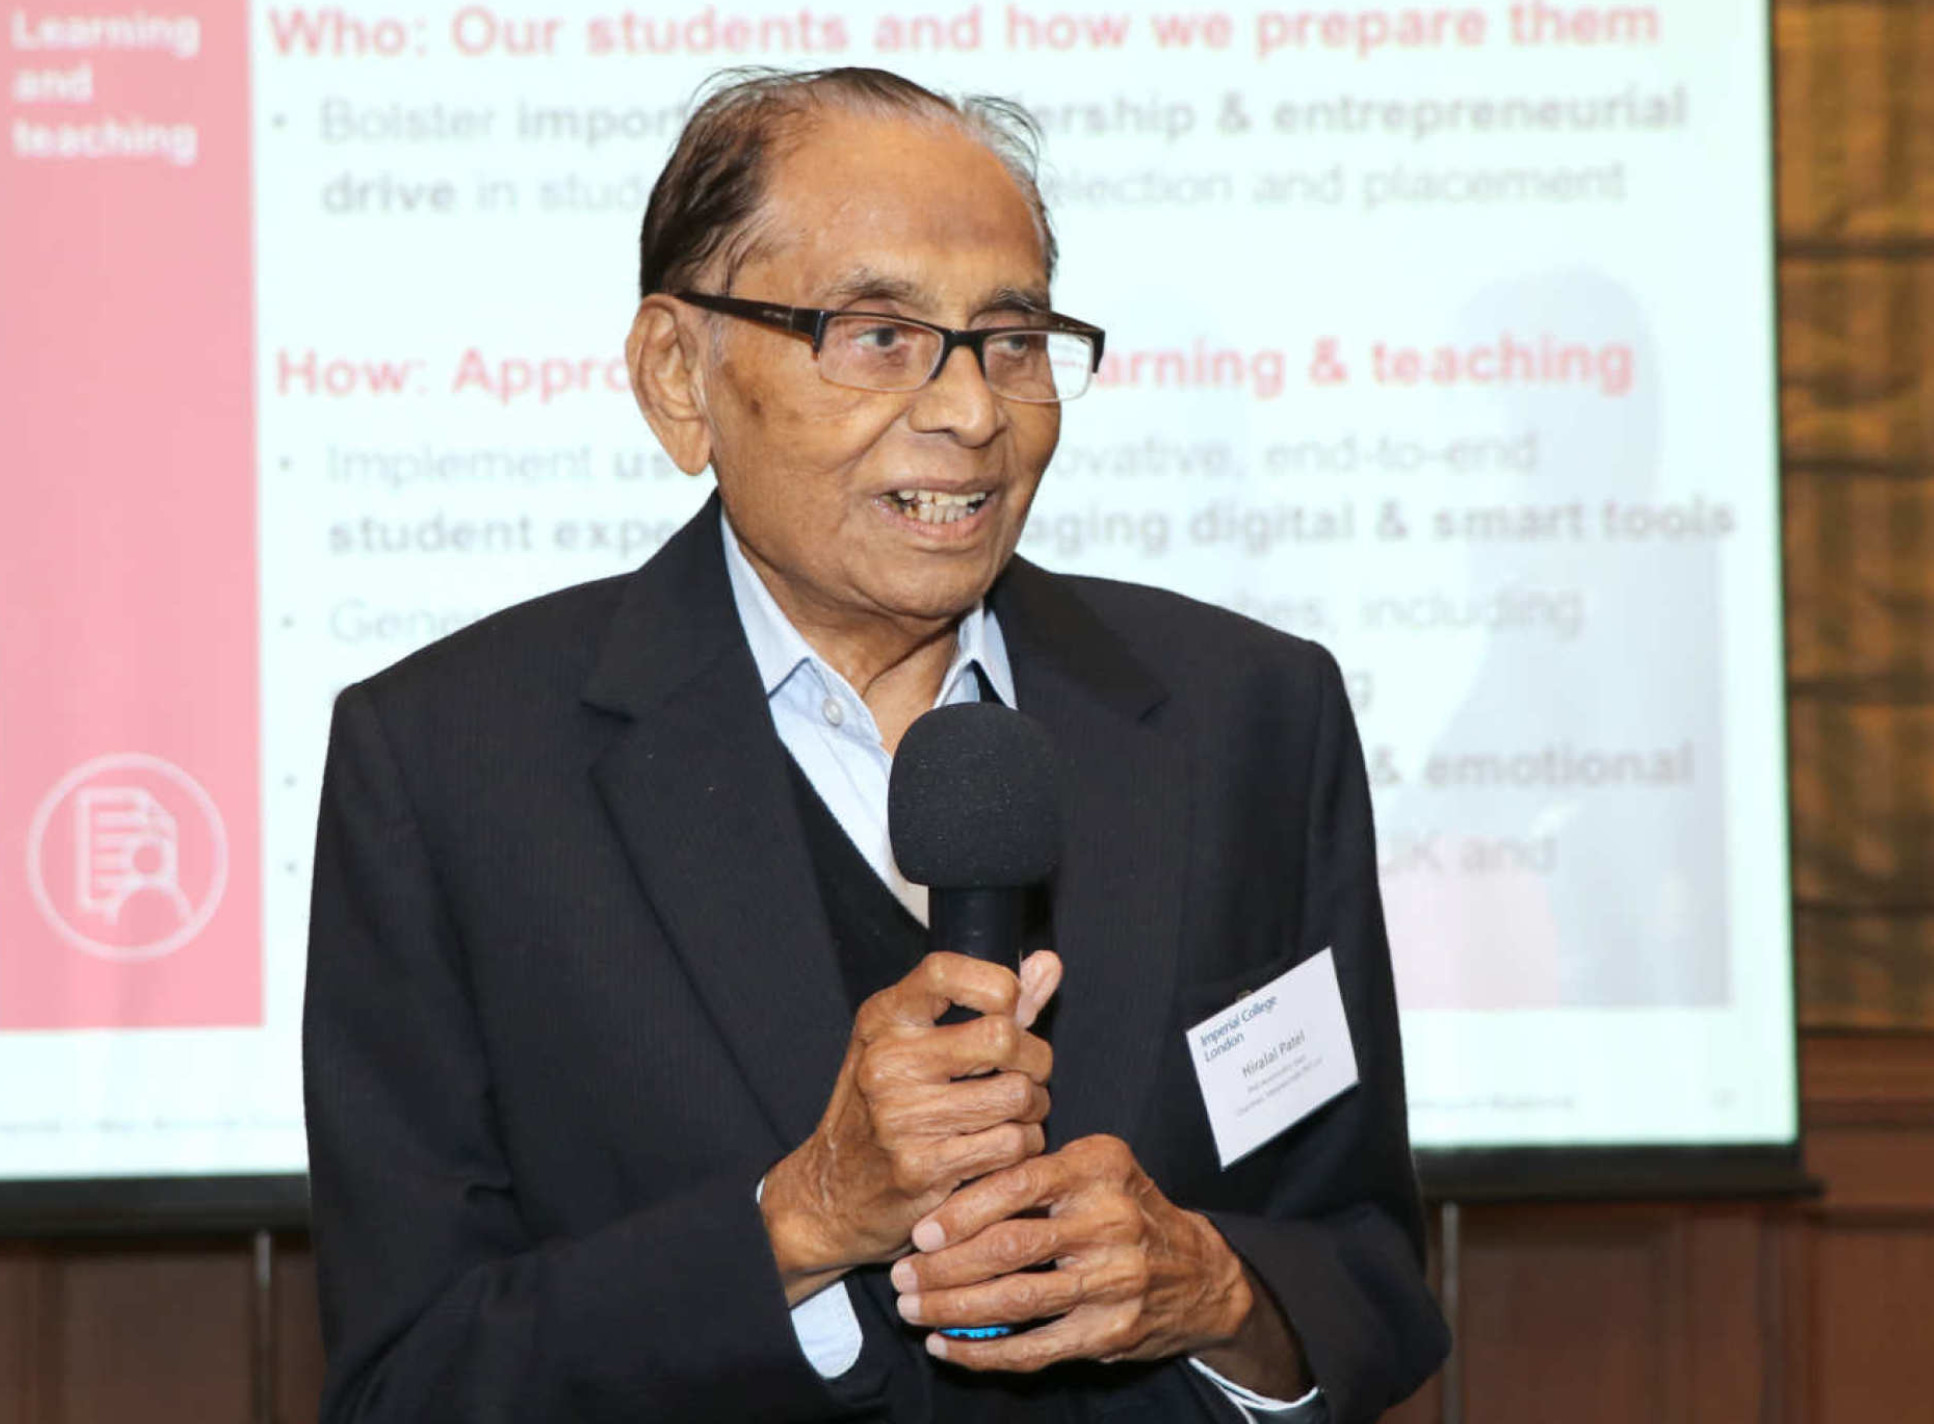 Dr Hiralal Patel speaking at an alumni event in 2018